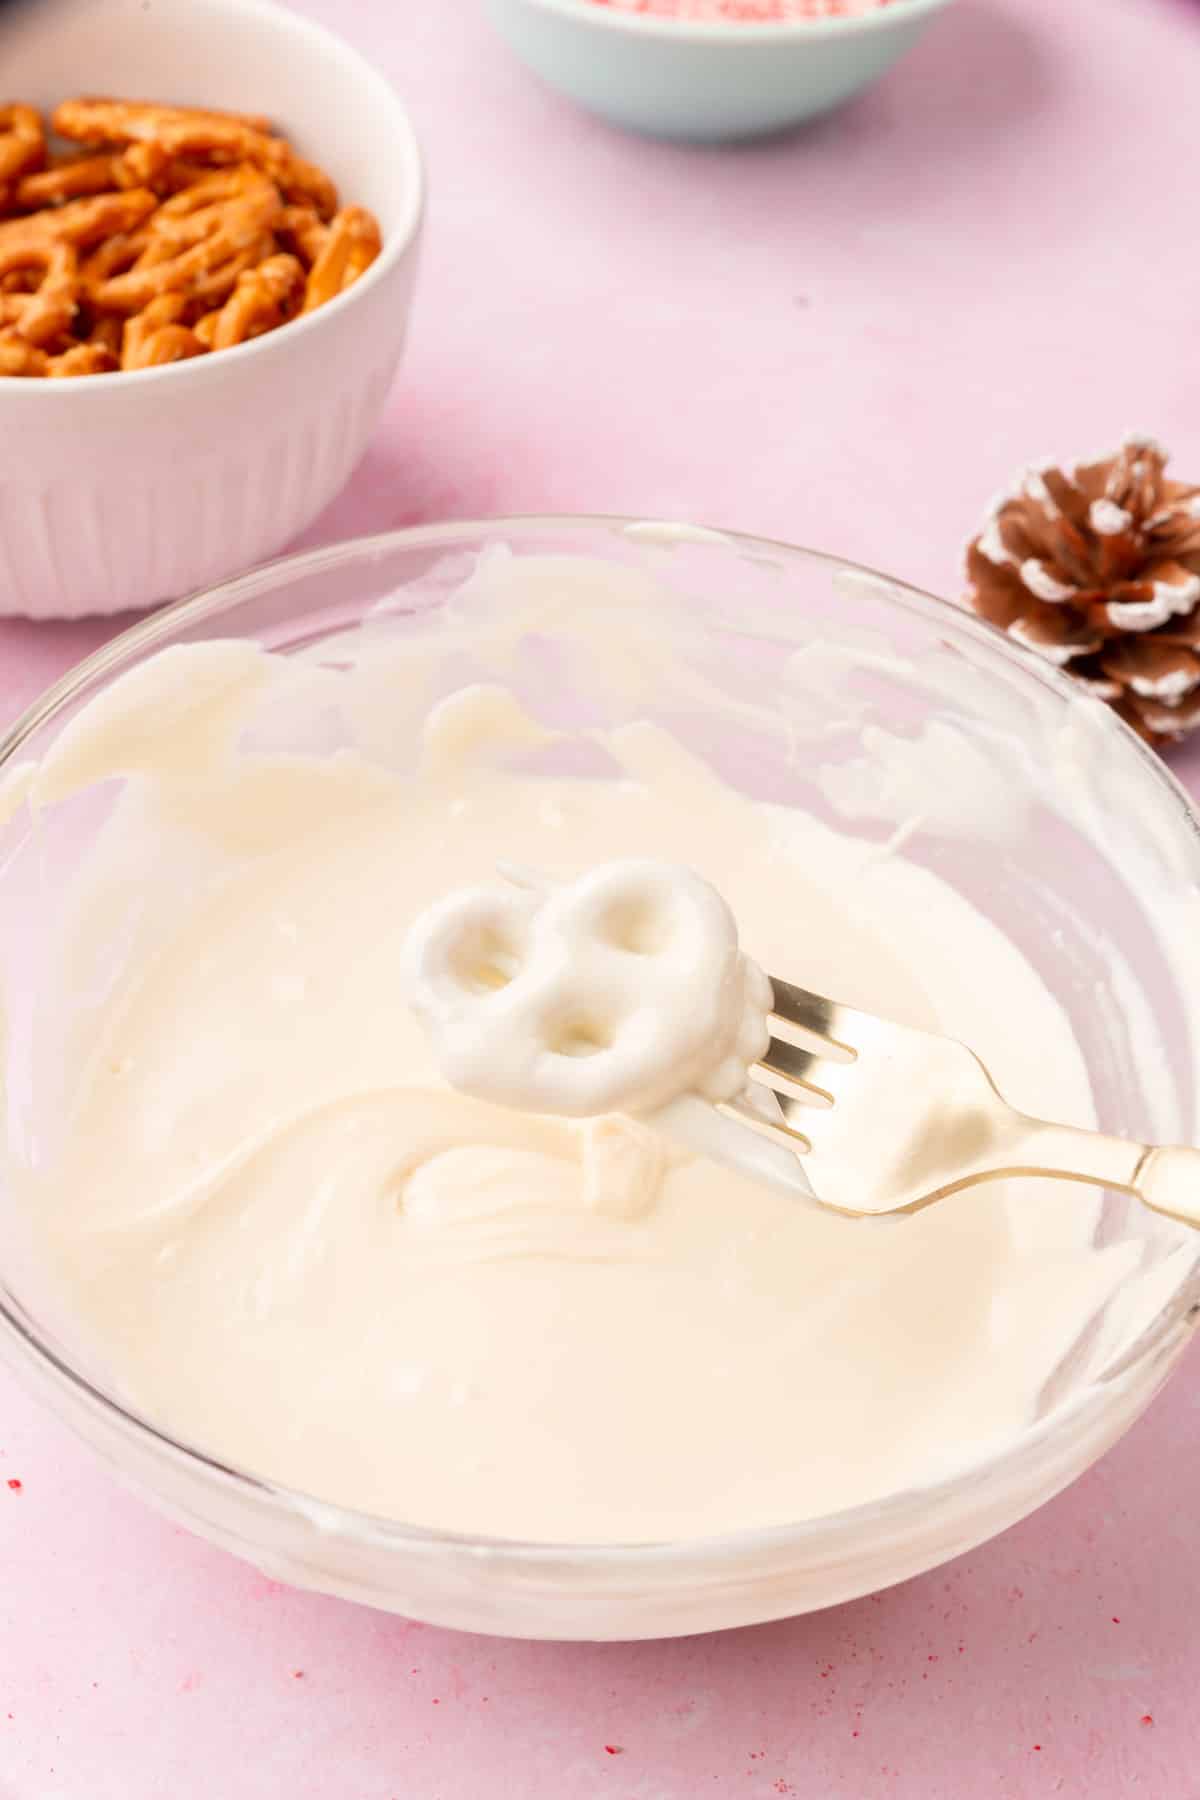 A bowl of melted white chocolate with a fork holding a dipped pretzel over the bowl.